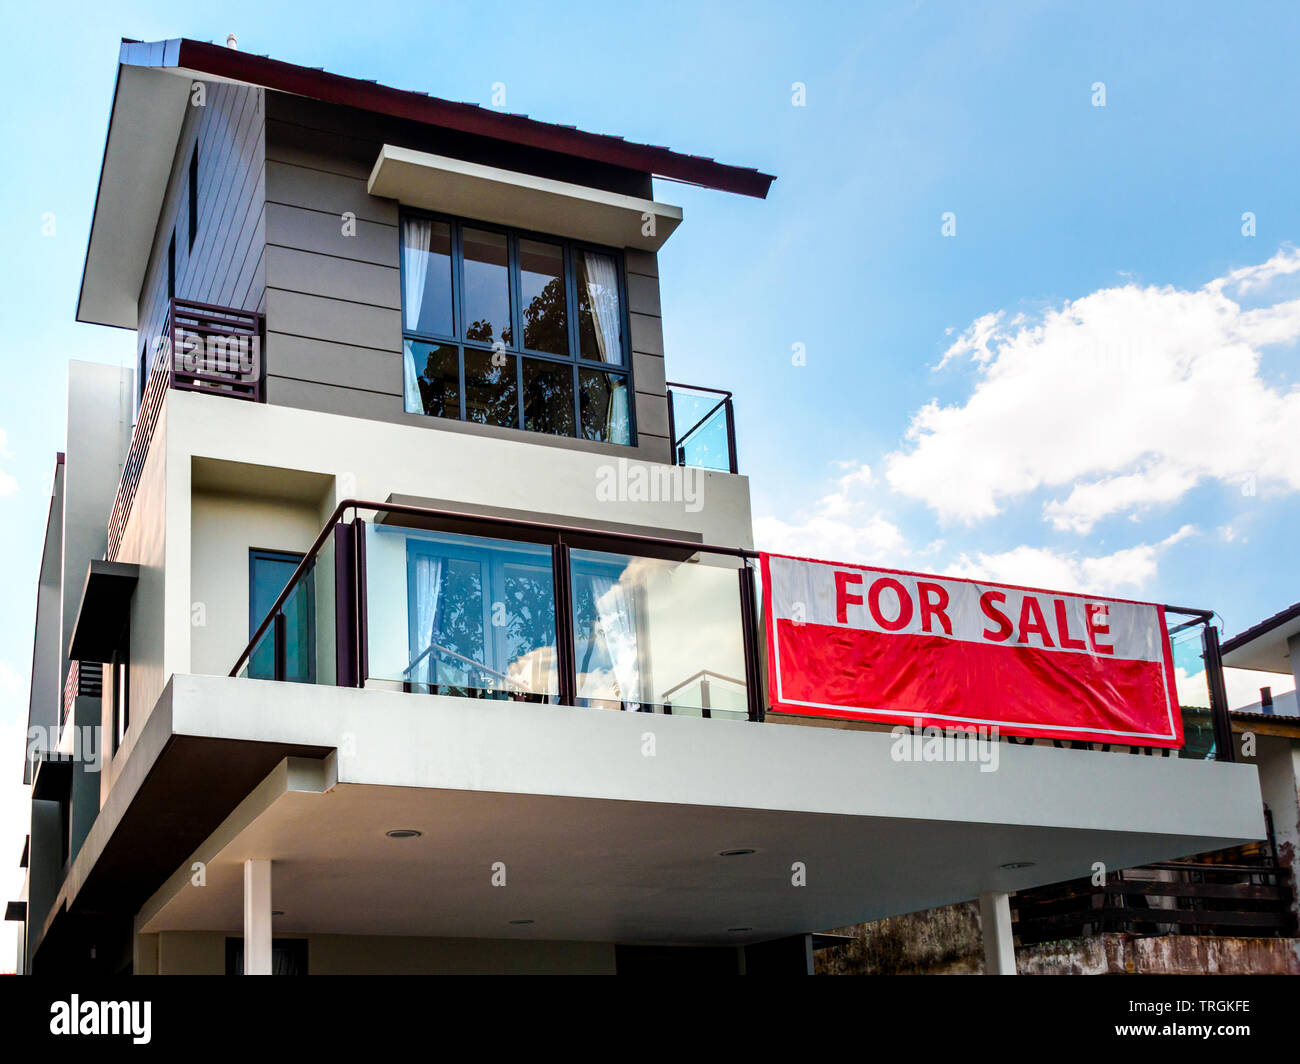 SINGAPORE, 15 MARCH 2019 - Low angle off-centre view of a house with red 'for sale' sign. Stock Photo